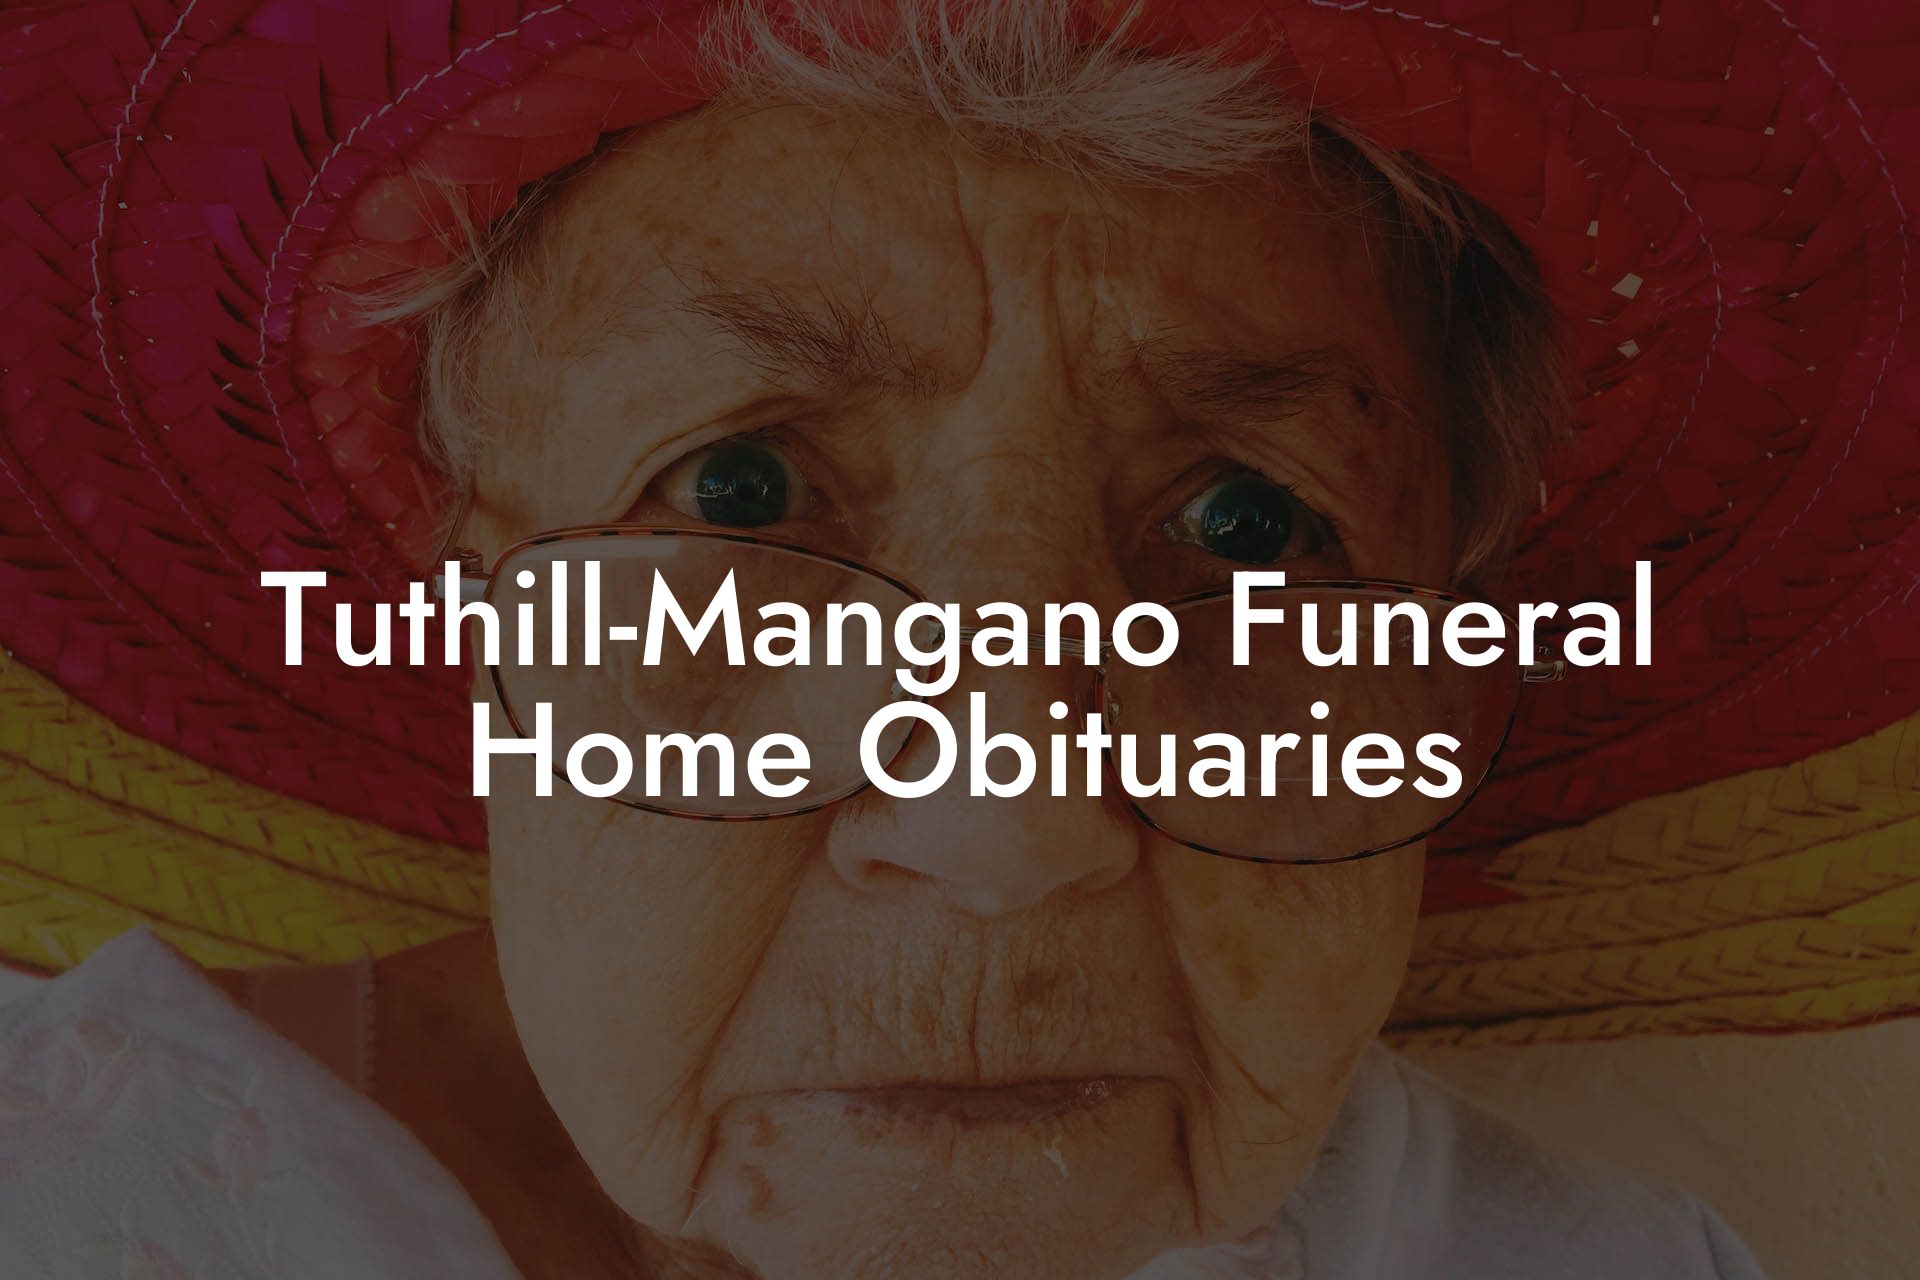 Tuthill-Mangano Funeral Home Obituaries